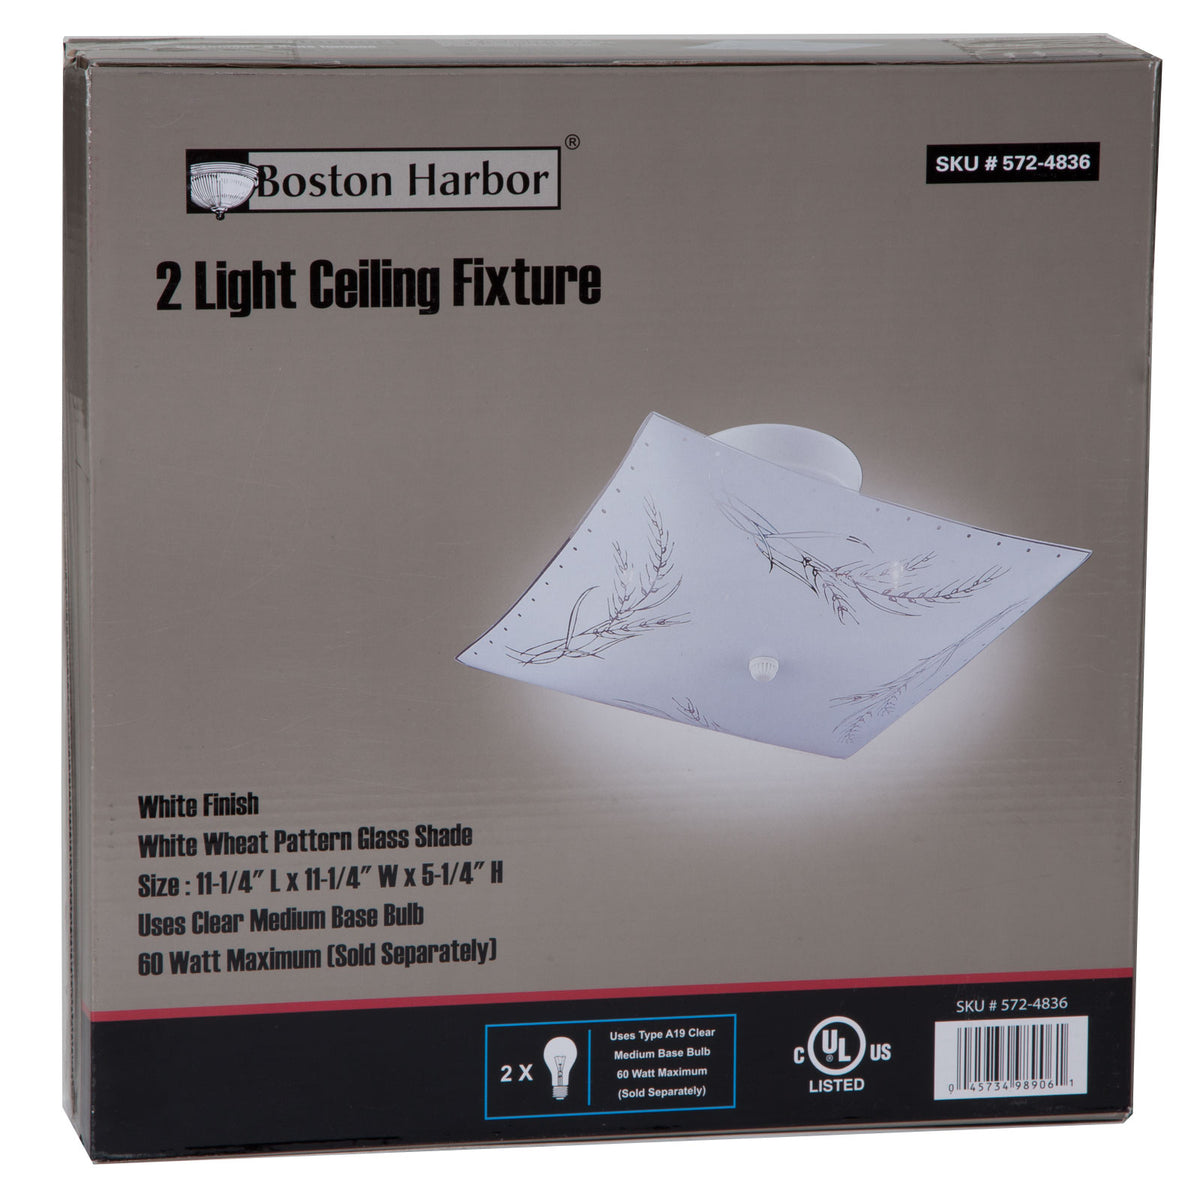 buy ceiling light fixtures at cheap rate in bulk. wholesale & retail outdoor lighting products store. home décor ideas, maintenance, repair replacement parts